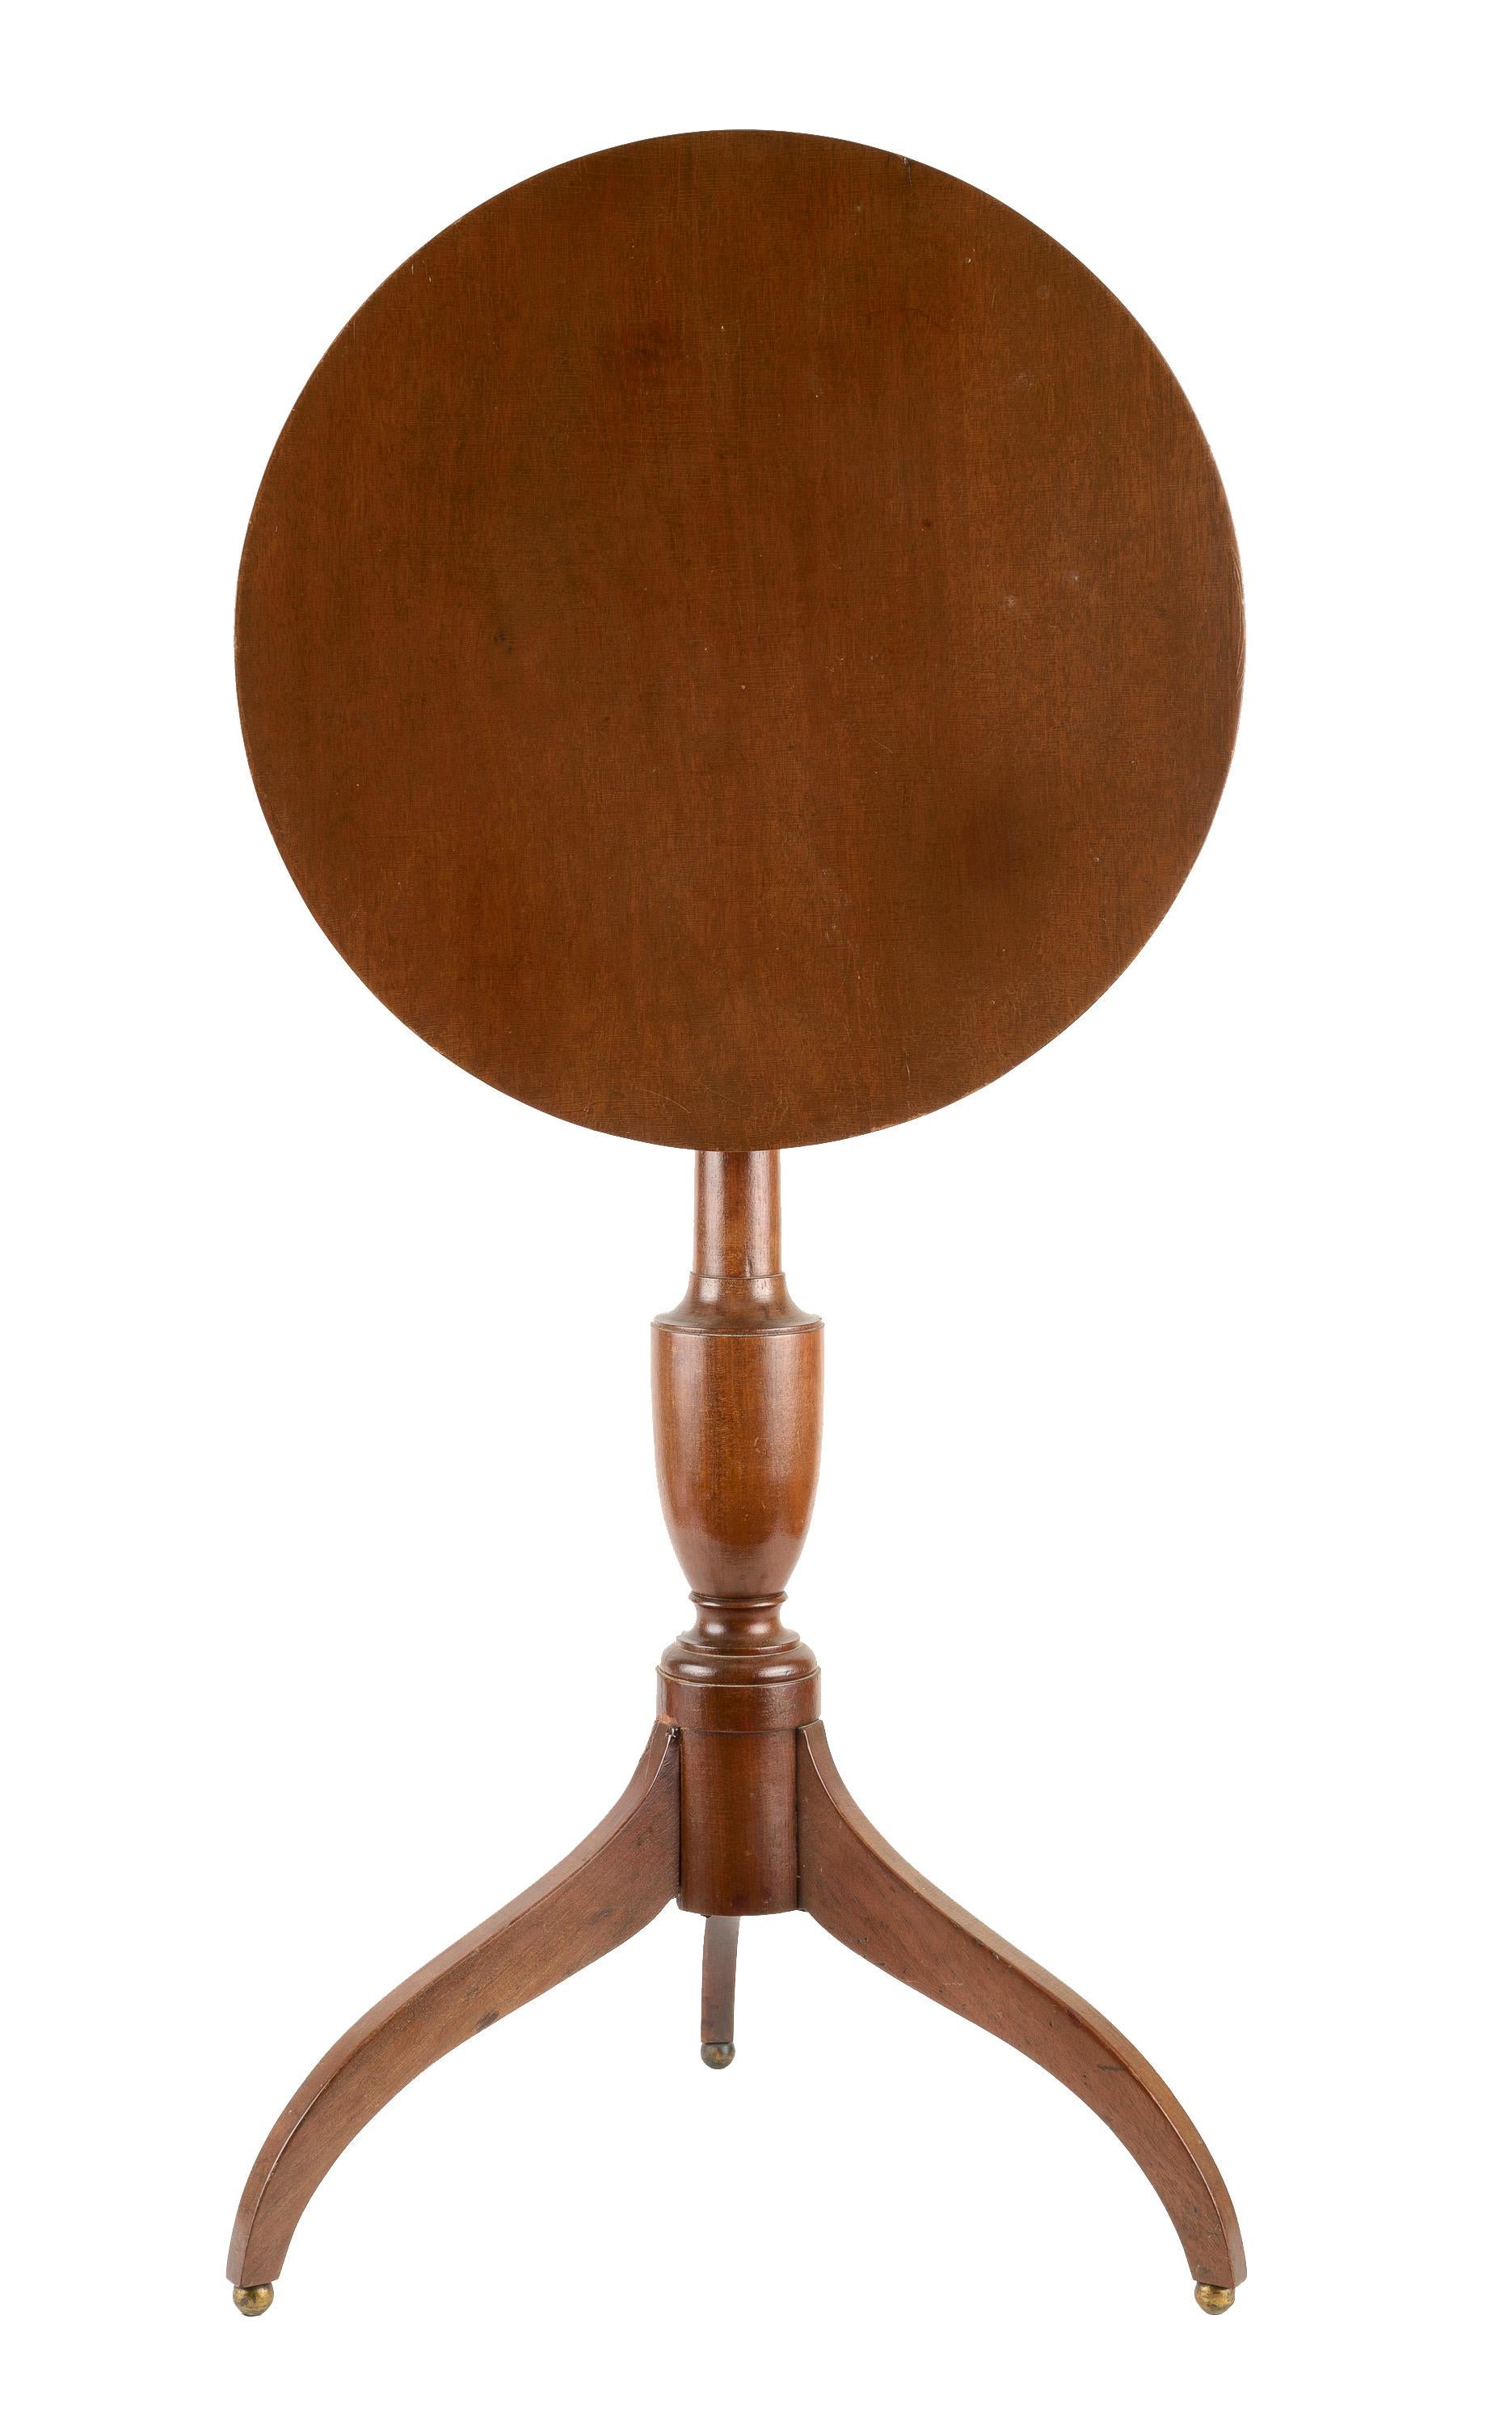 Hand-Crafted 18th Century American Tilt Top Table